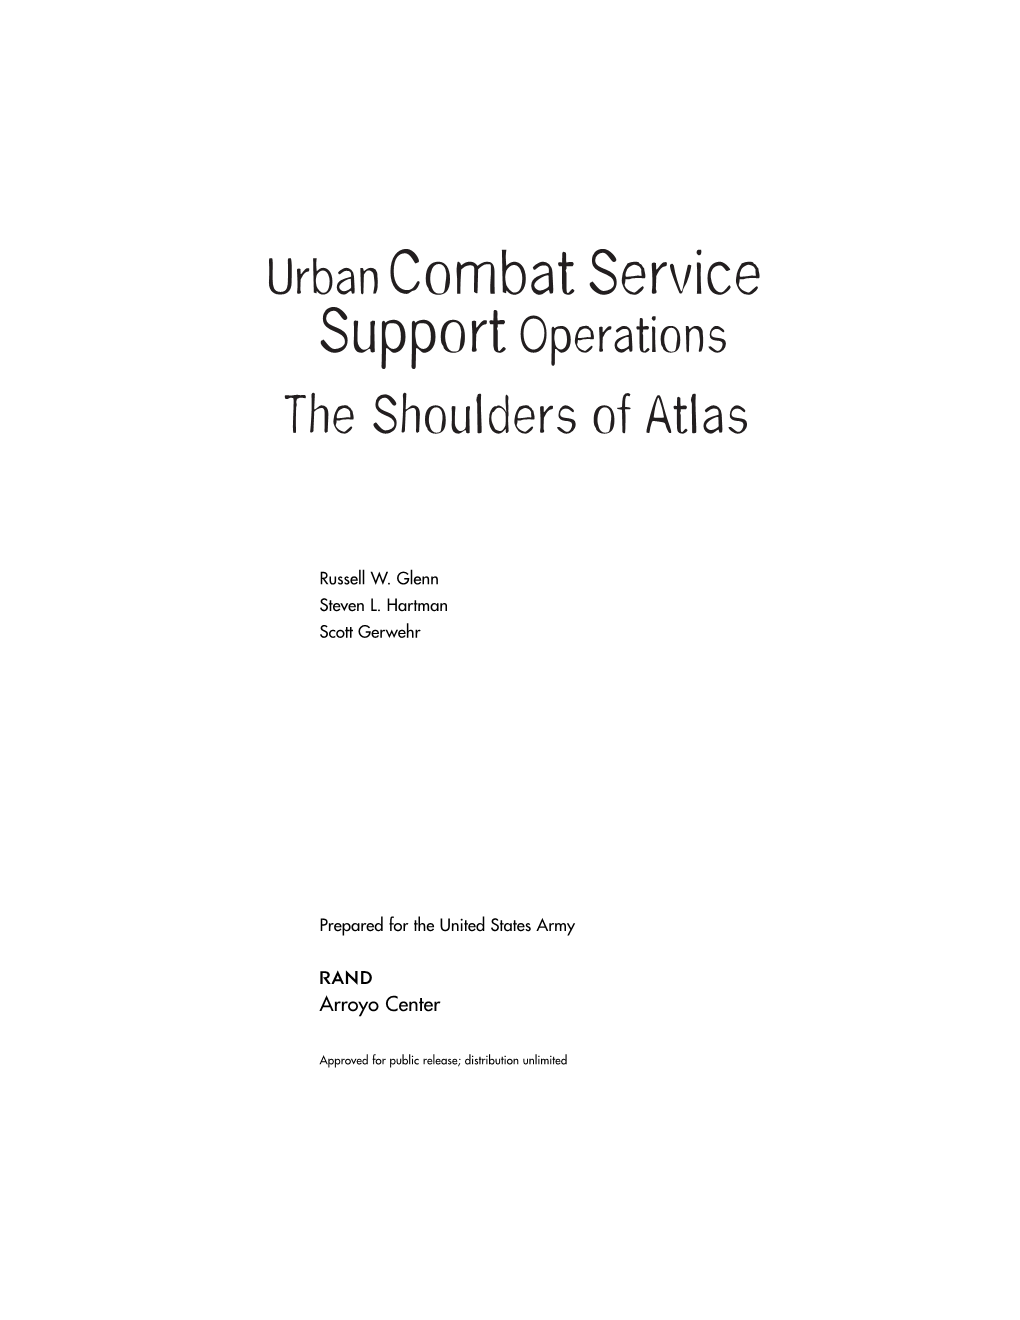 Urban Combat Service Support Operations: the Shoulders of Atlas